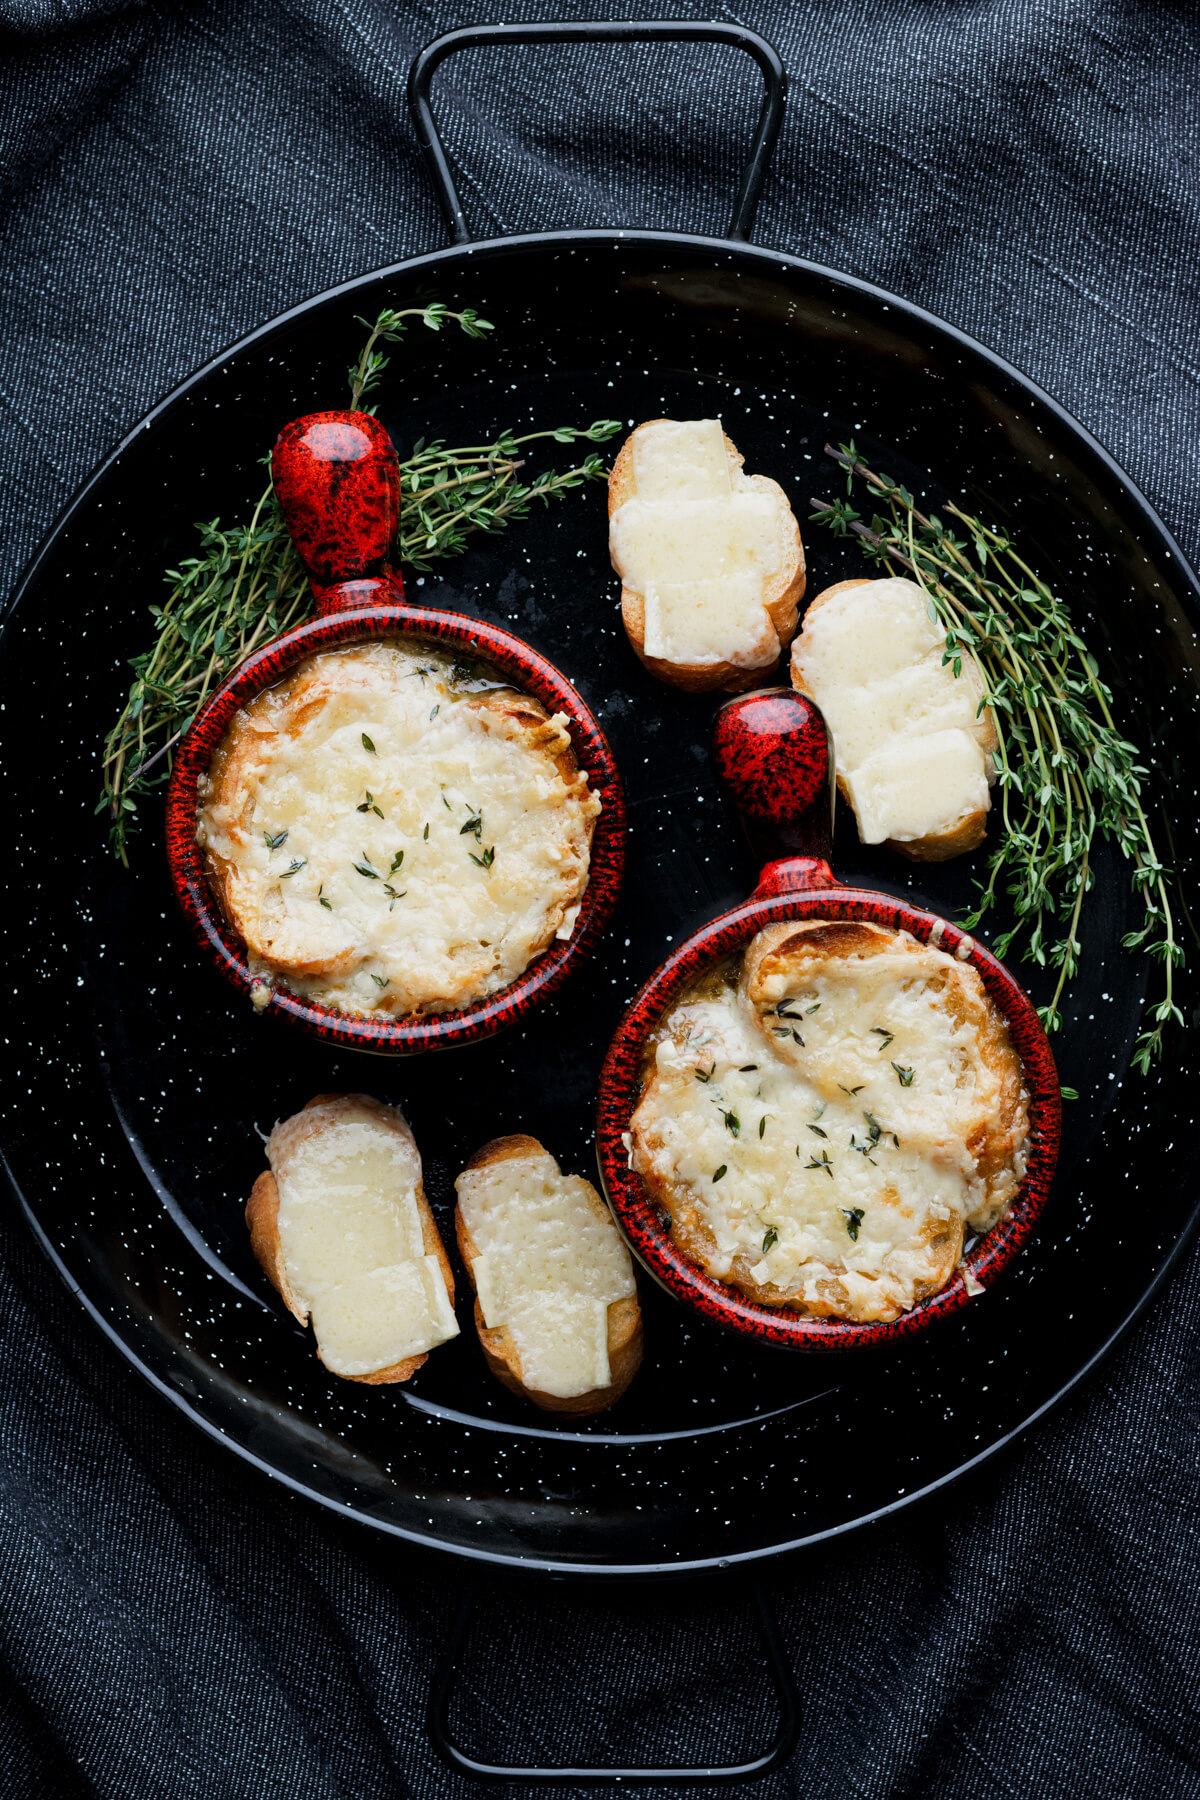 Two cheese topped bowls of French Onion soup in stunning pottery soup bowls.